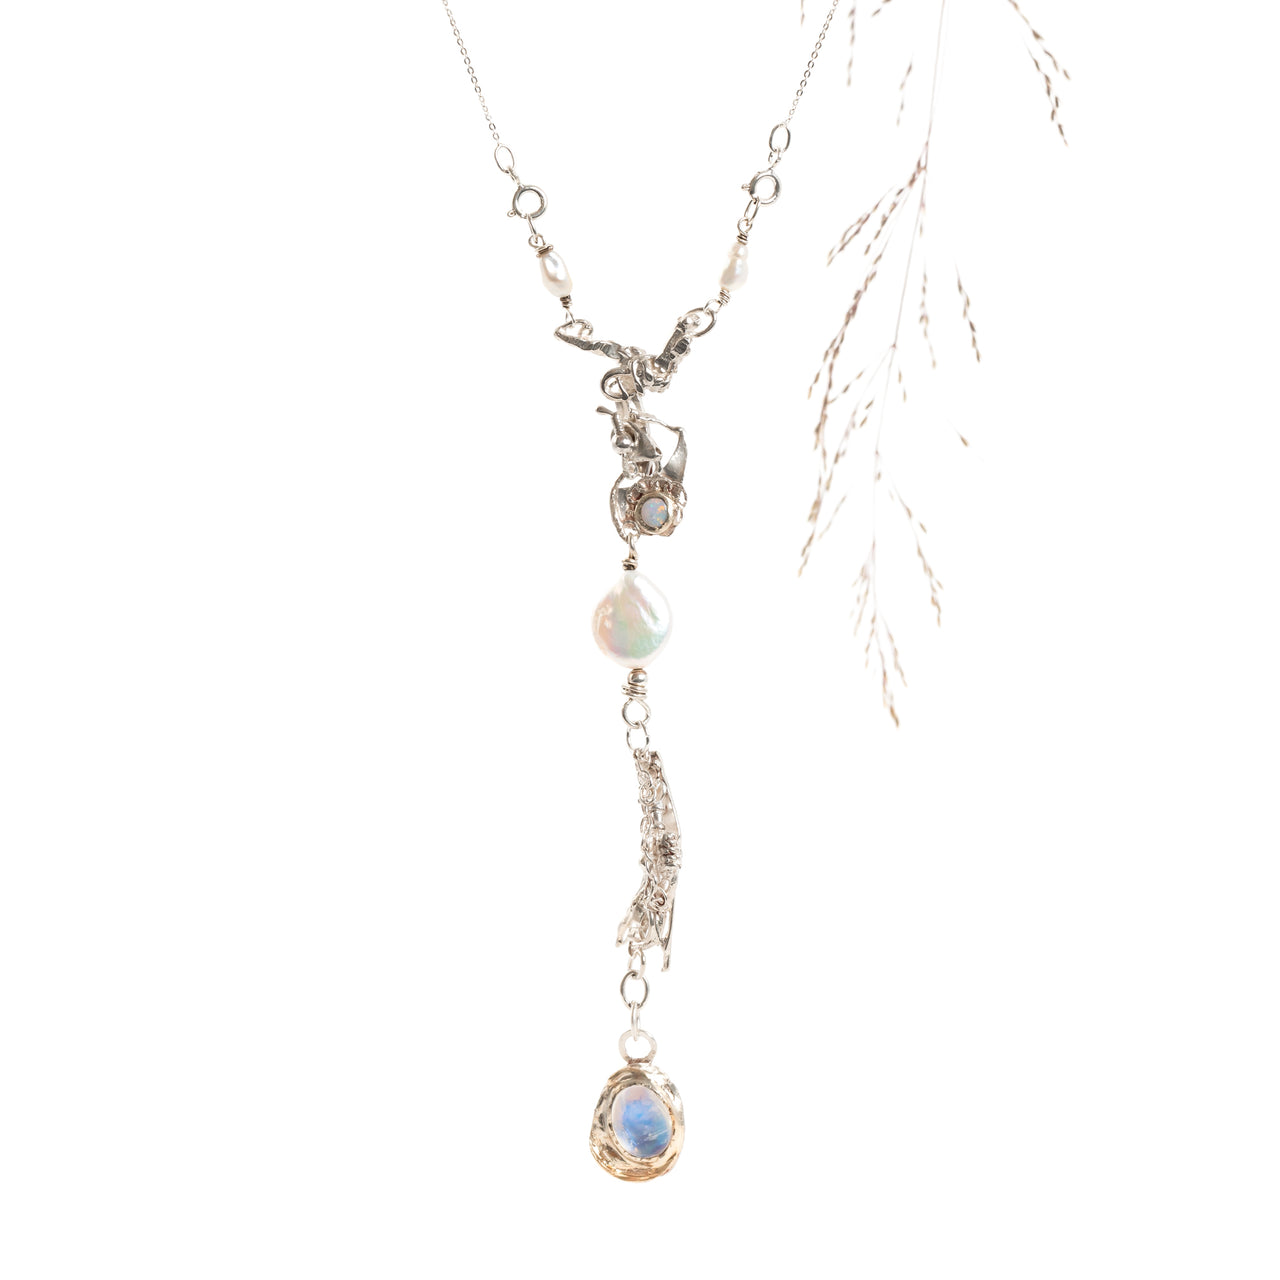 Moonstone, Opal and Pearl Recycled Silver and Gold Necklace